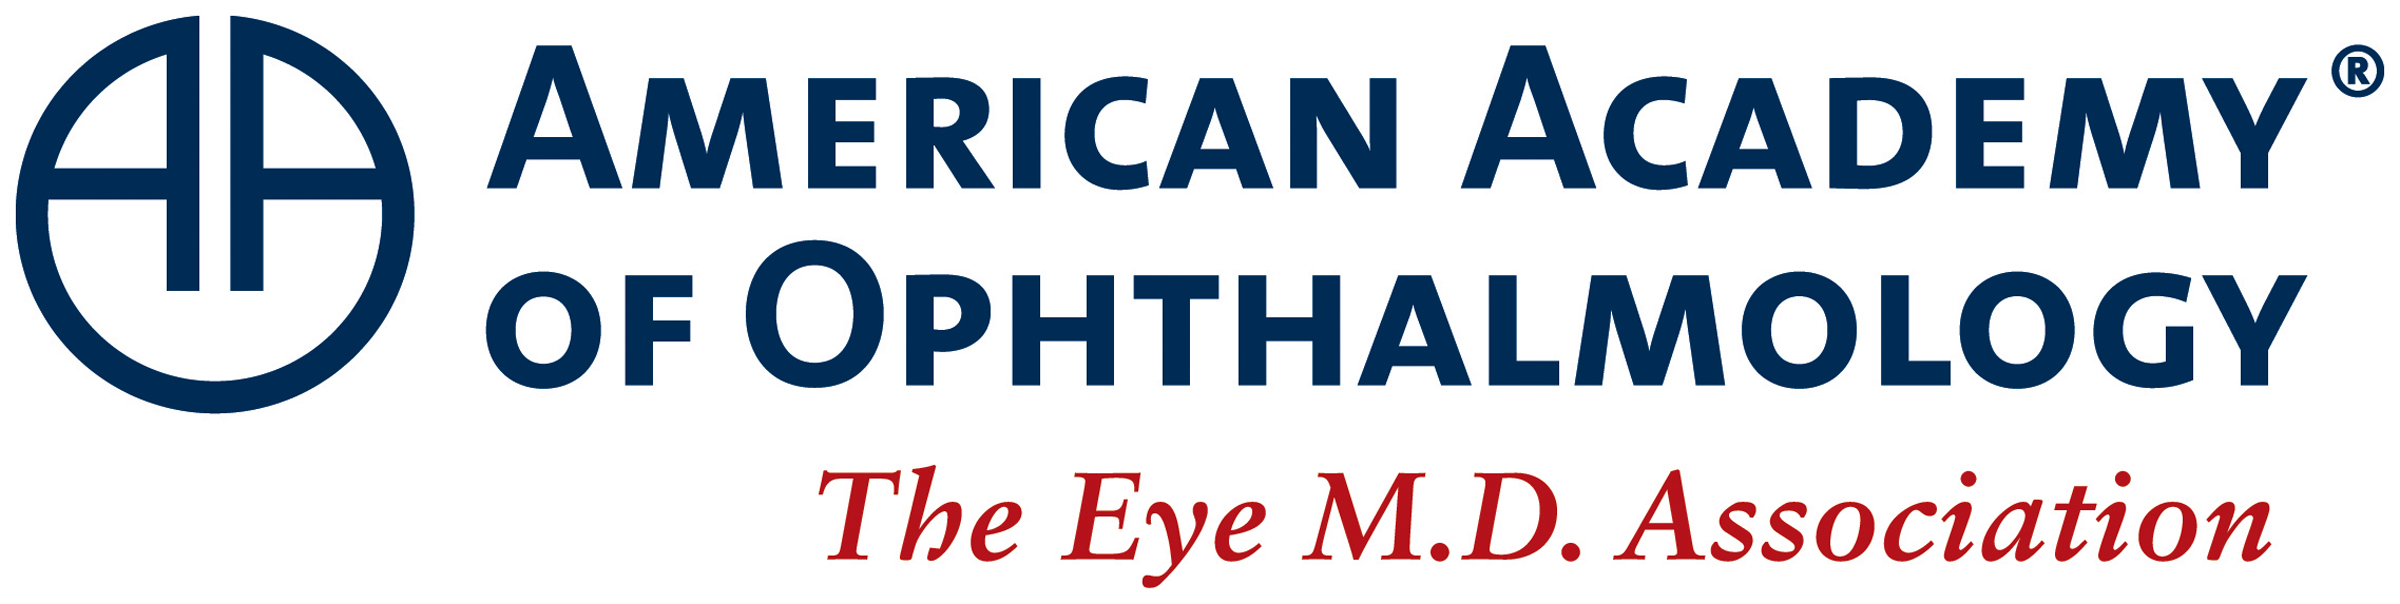 american-academy-ophthalmology-annual-meeting